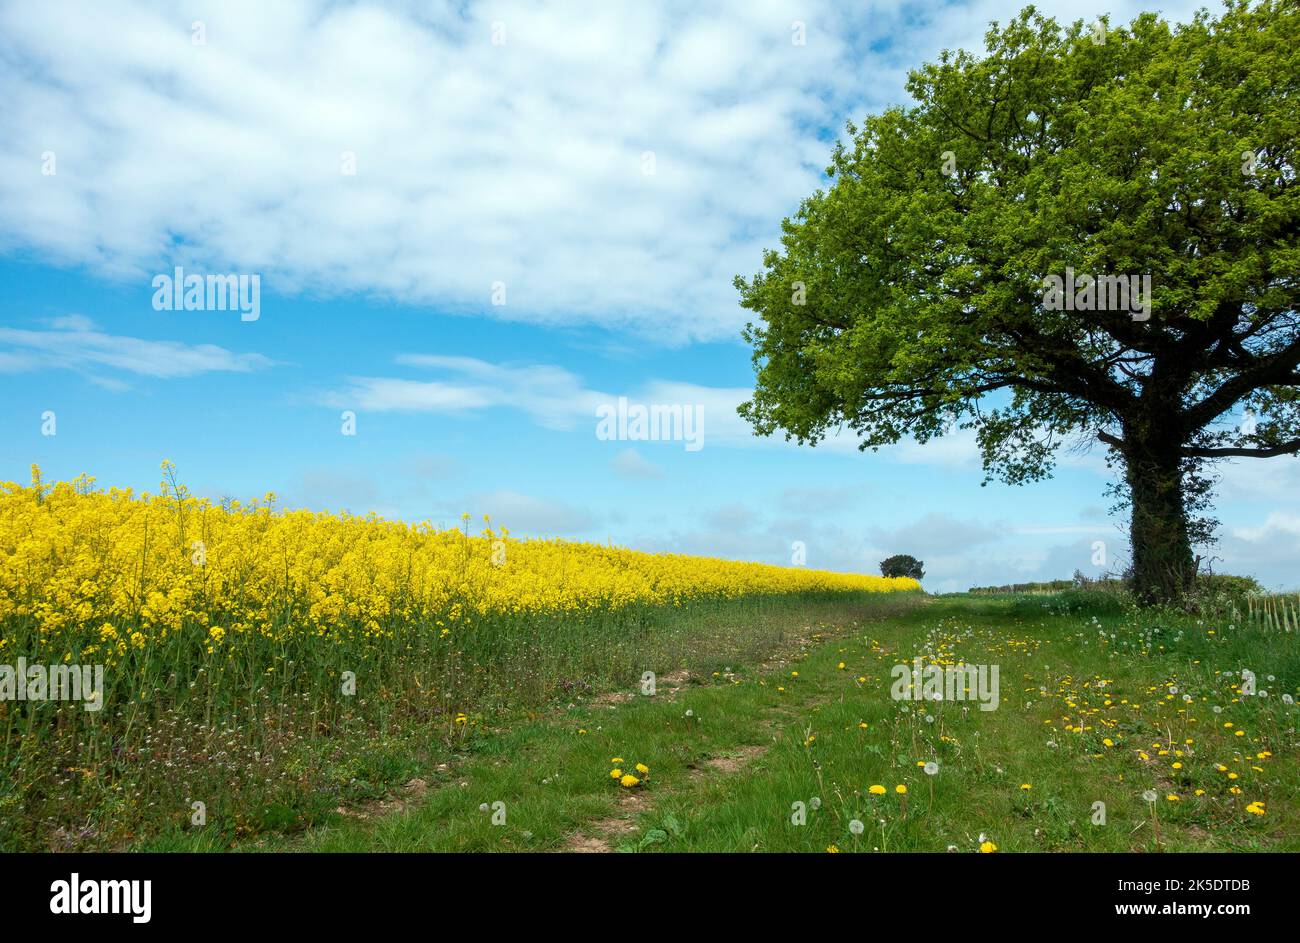 Fields of rapeseed growing next to the South Downs Way walking route in Hampshire, England, UK Stock Photo